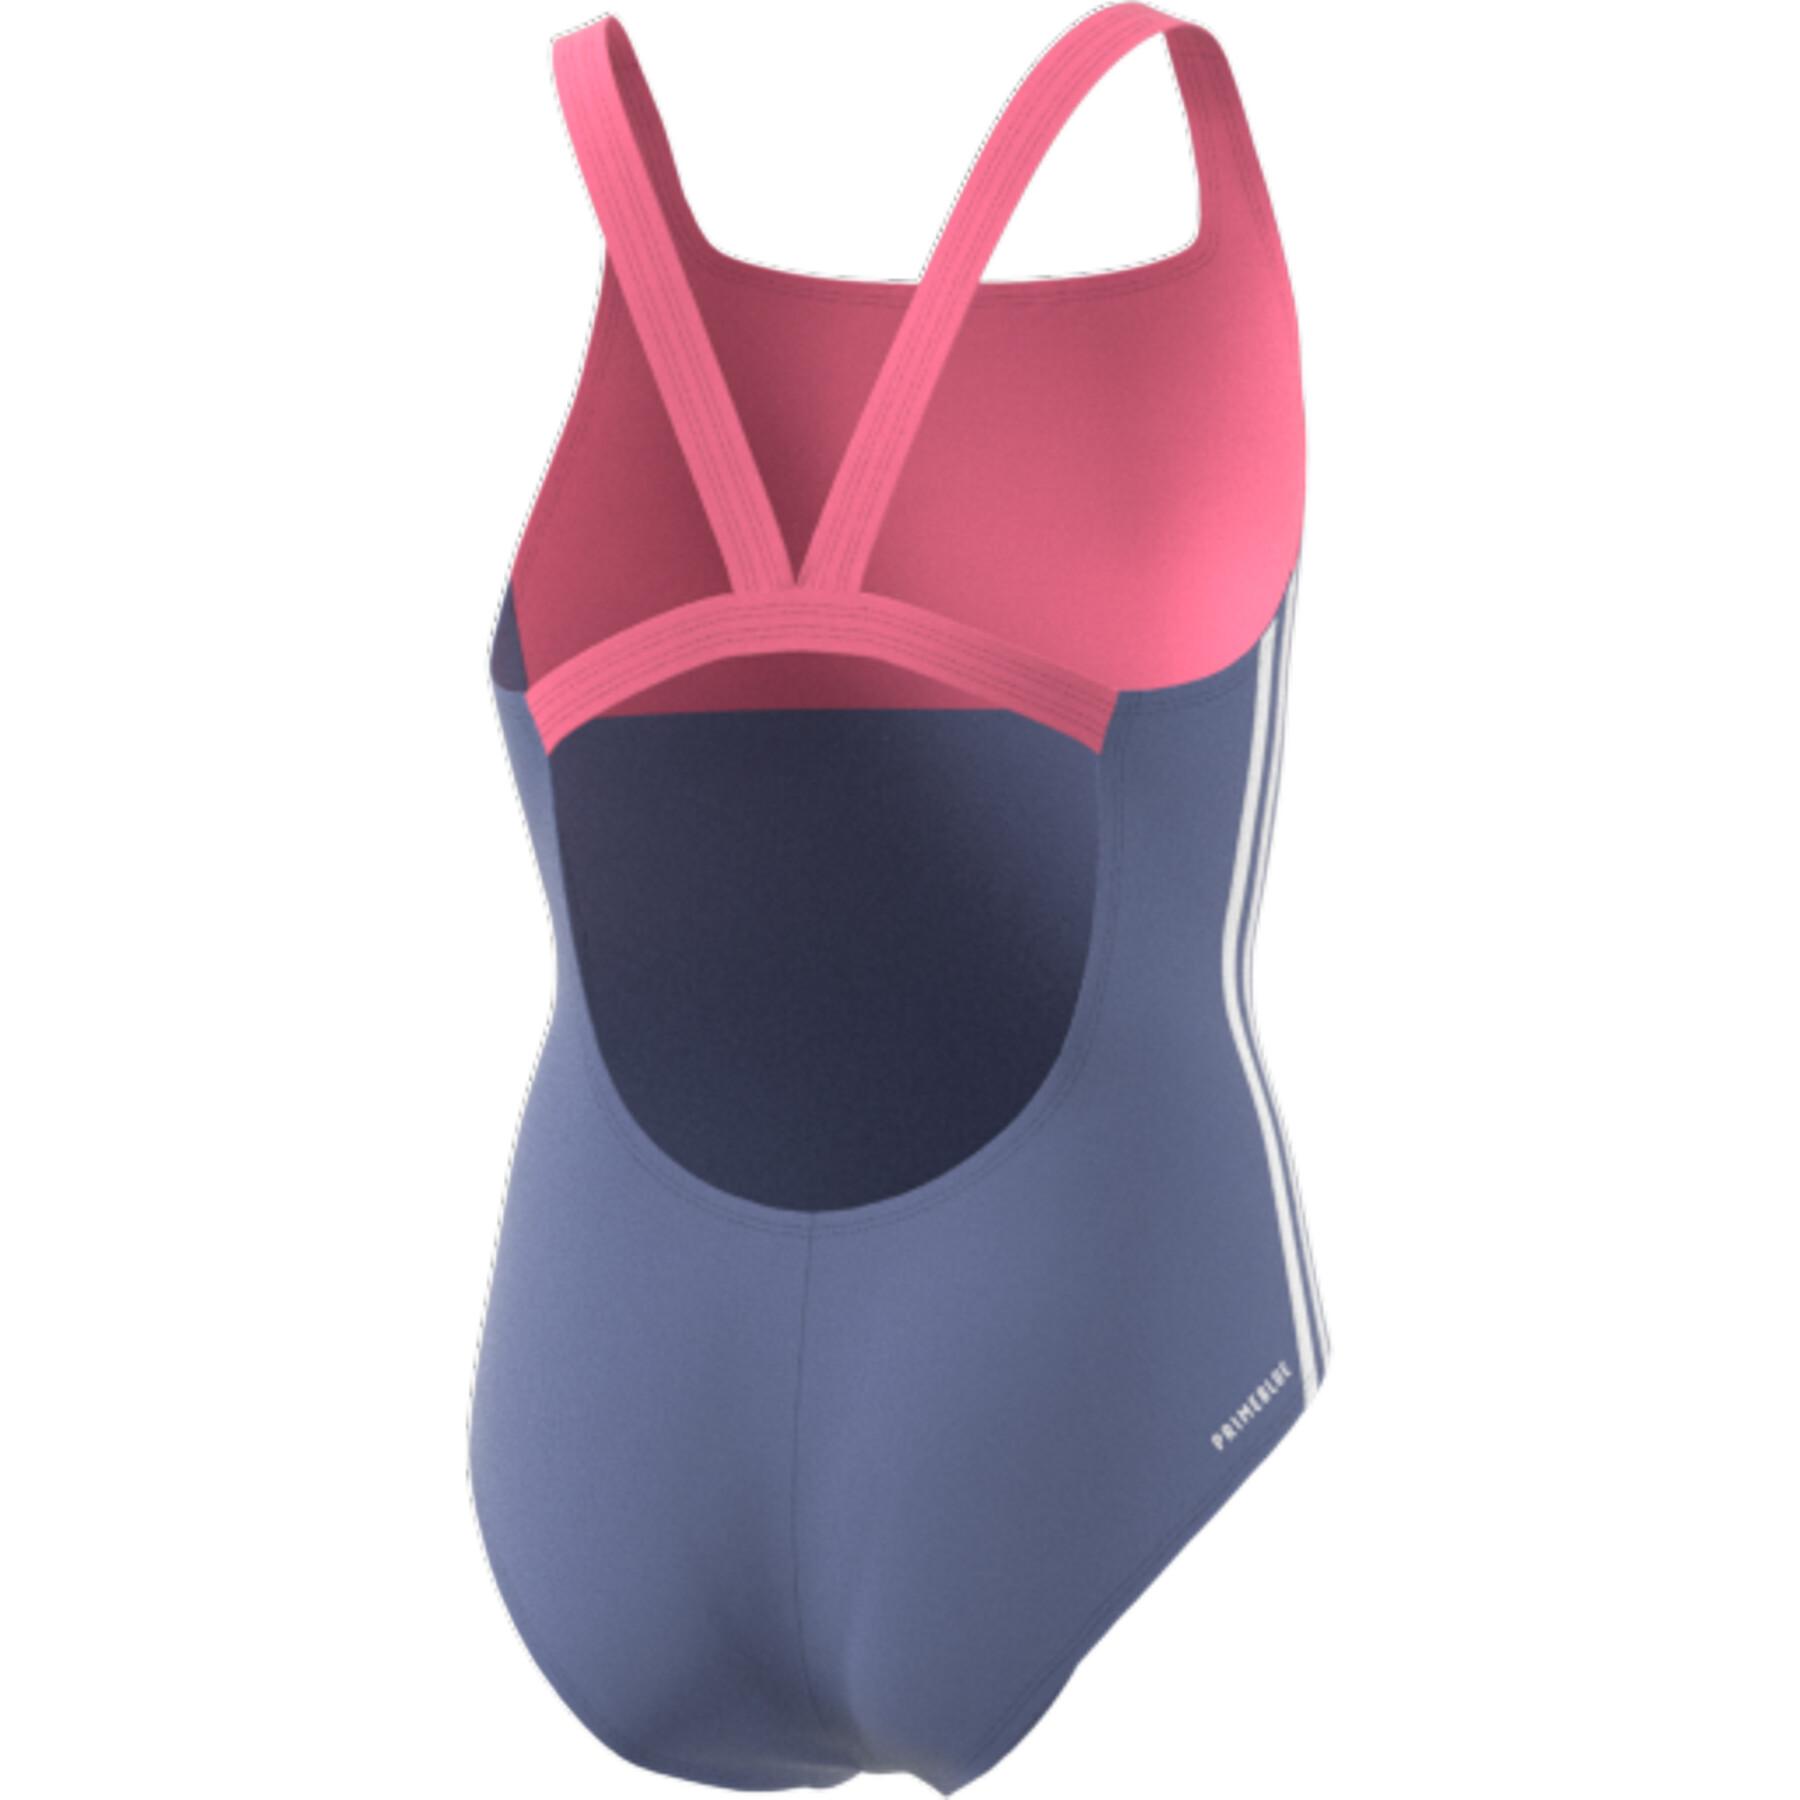 Girl's swimsuit adidas Colorblock 3-Stripes